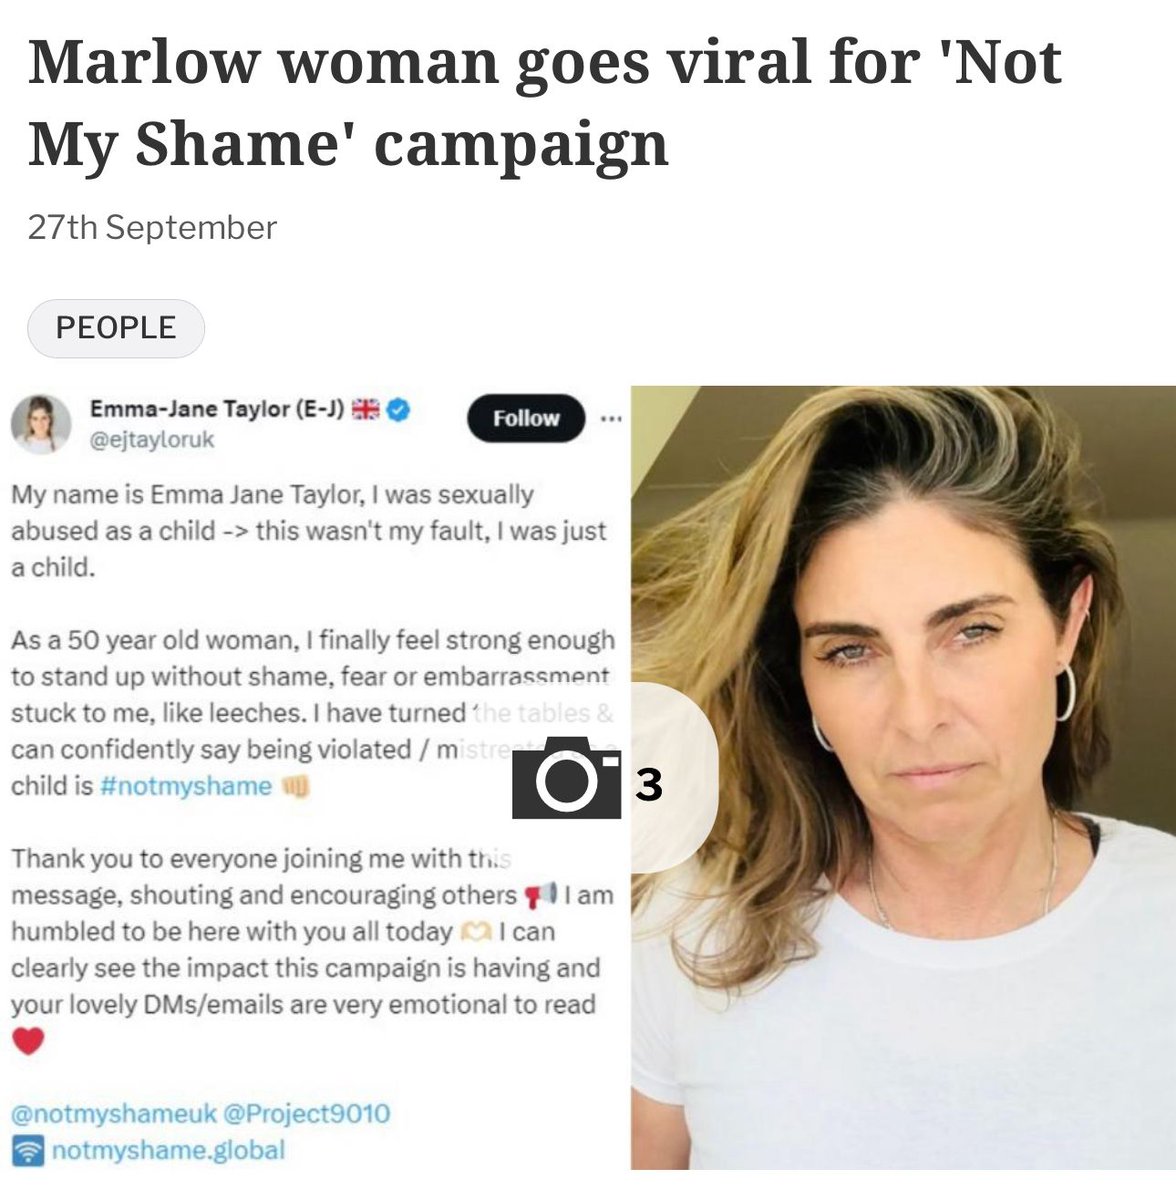 In 2023, Emma Jane Taylor put on a tee-shirt. She did this to prove to herself that she was ready to be a campaigner and Charity leader. Today we observe the NotMyShame movement. An emotional day for so many. 
If you want to join us in anyway, please visit notmyshame.global